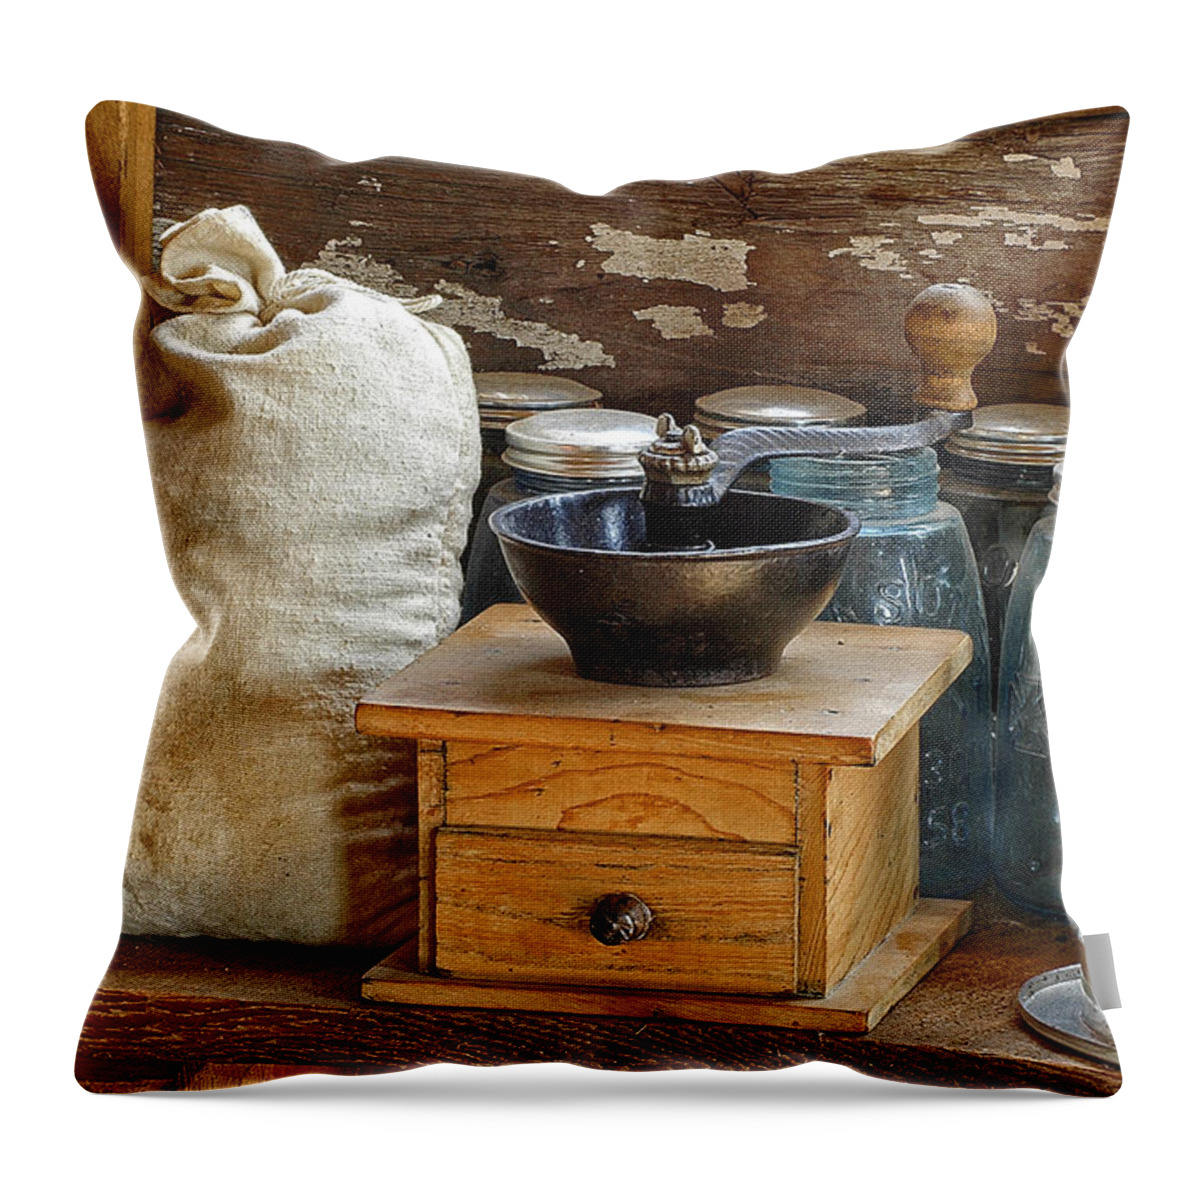 Grinder Throw Pillow featuring the photograph Antique Grinder by Scott Read